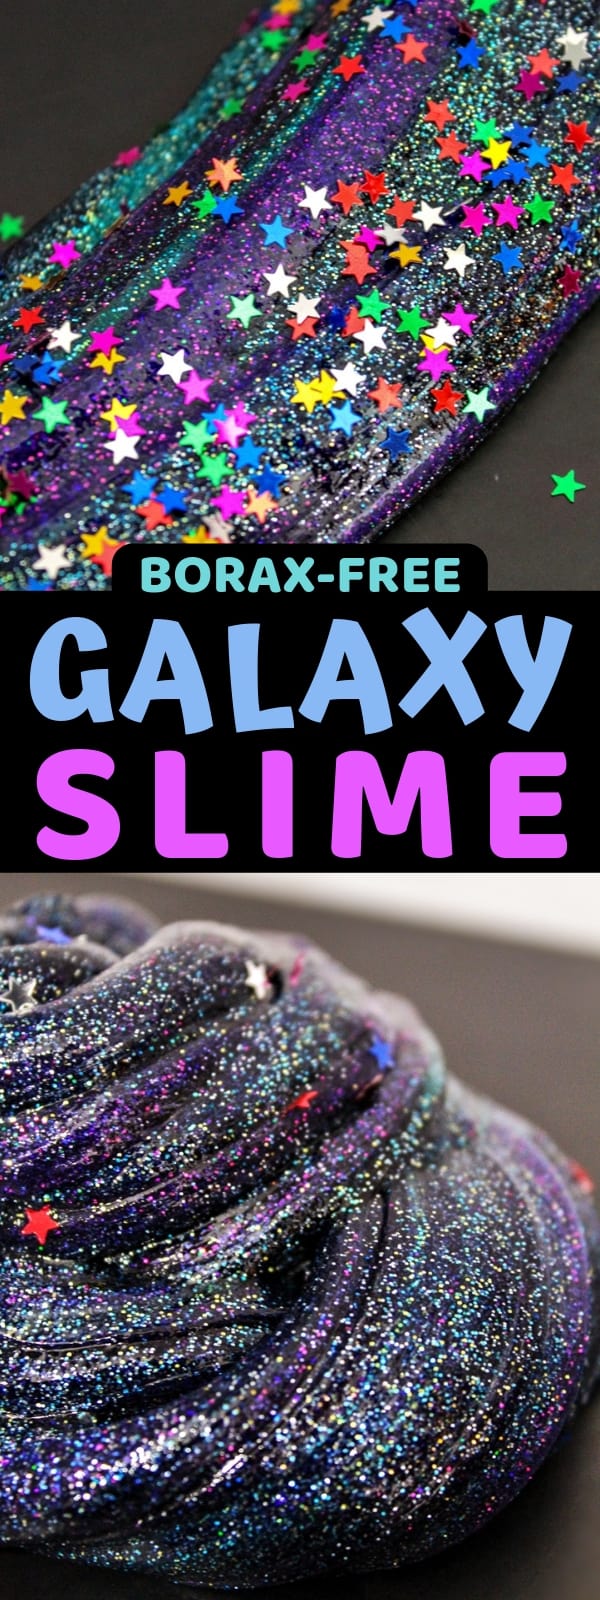 Learn how to make galaxy slime with this easy galaxy slime recipe. The dark colors and glitter combine for DIY slime that is truly out of this world! 